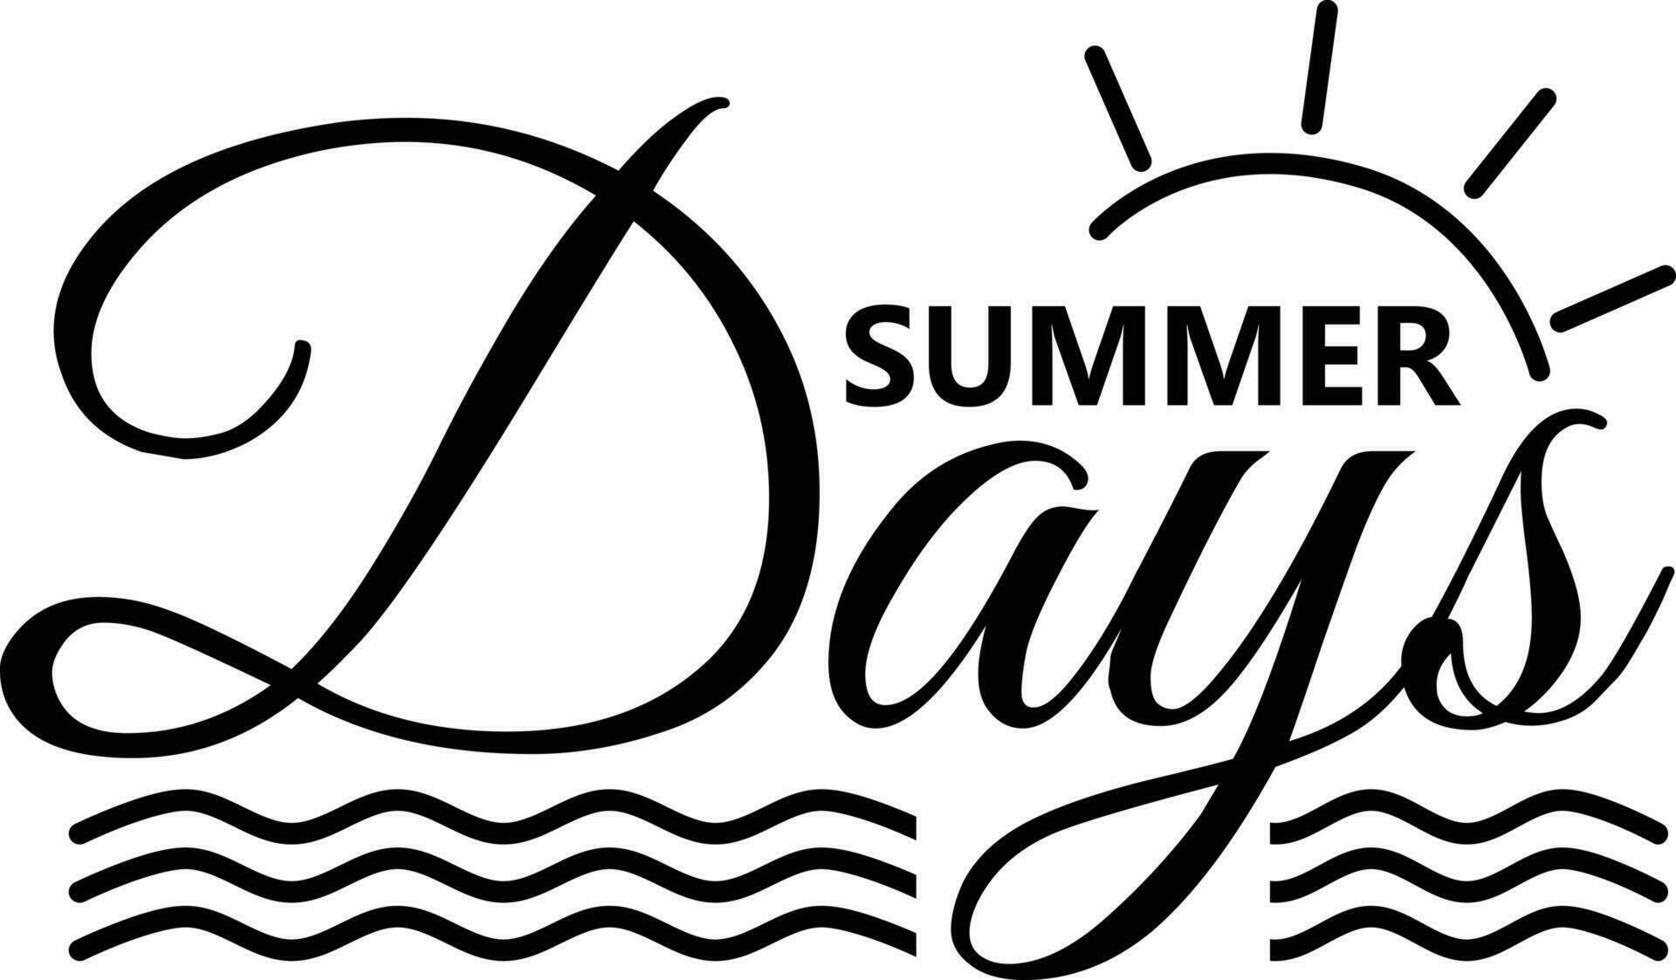 Summer Days vector lettering with sun and sea icon, vector illustration isolated on white